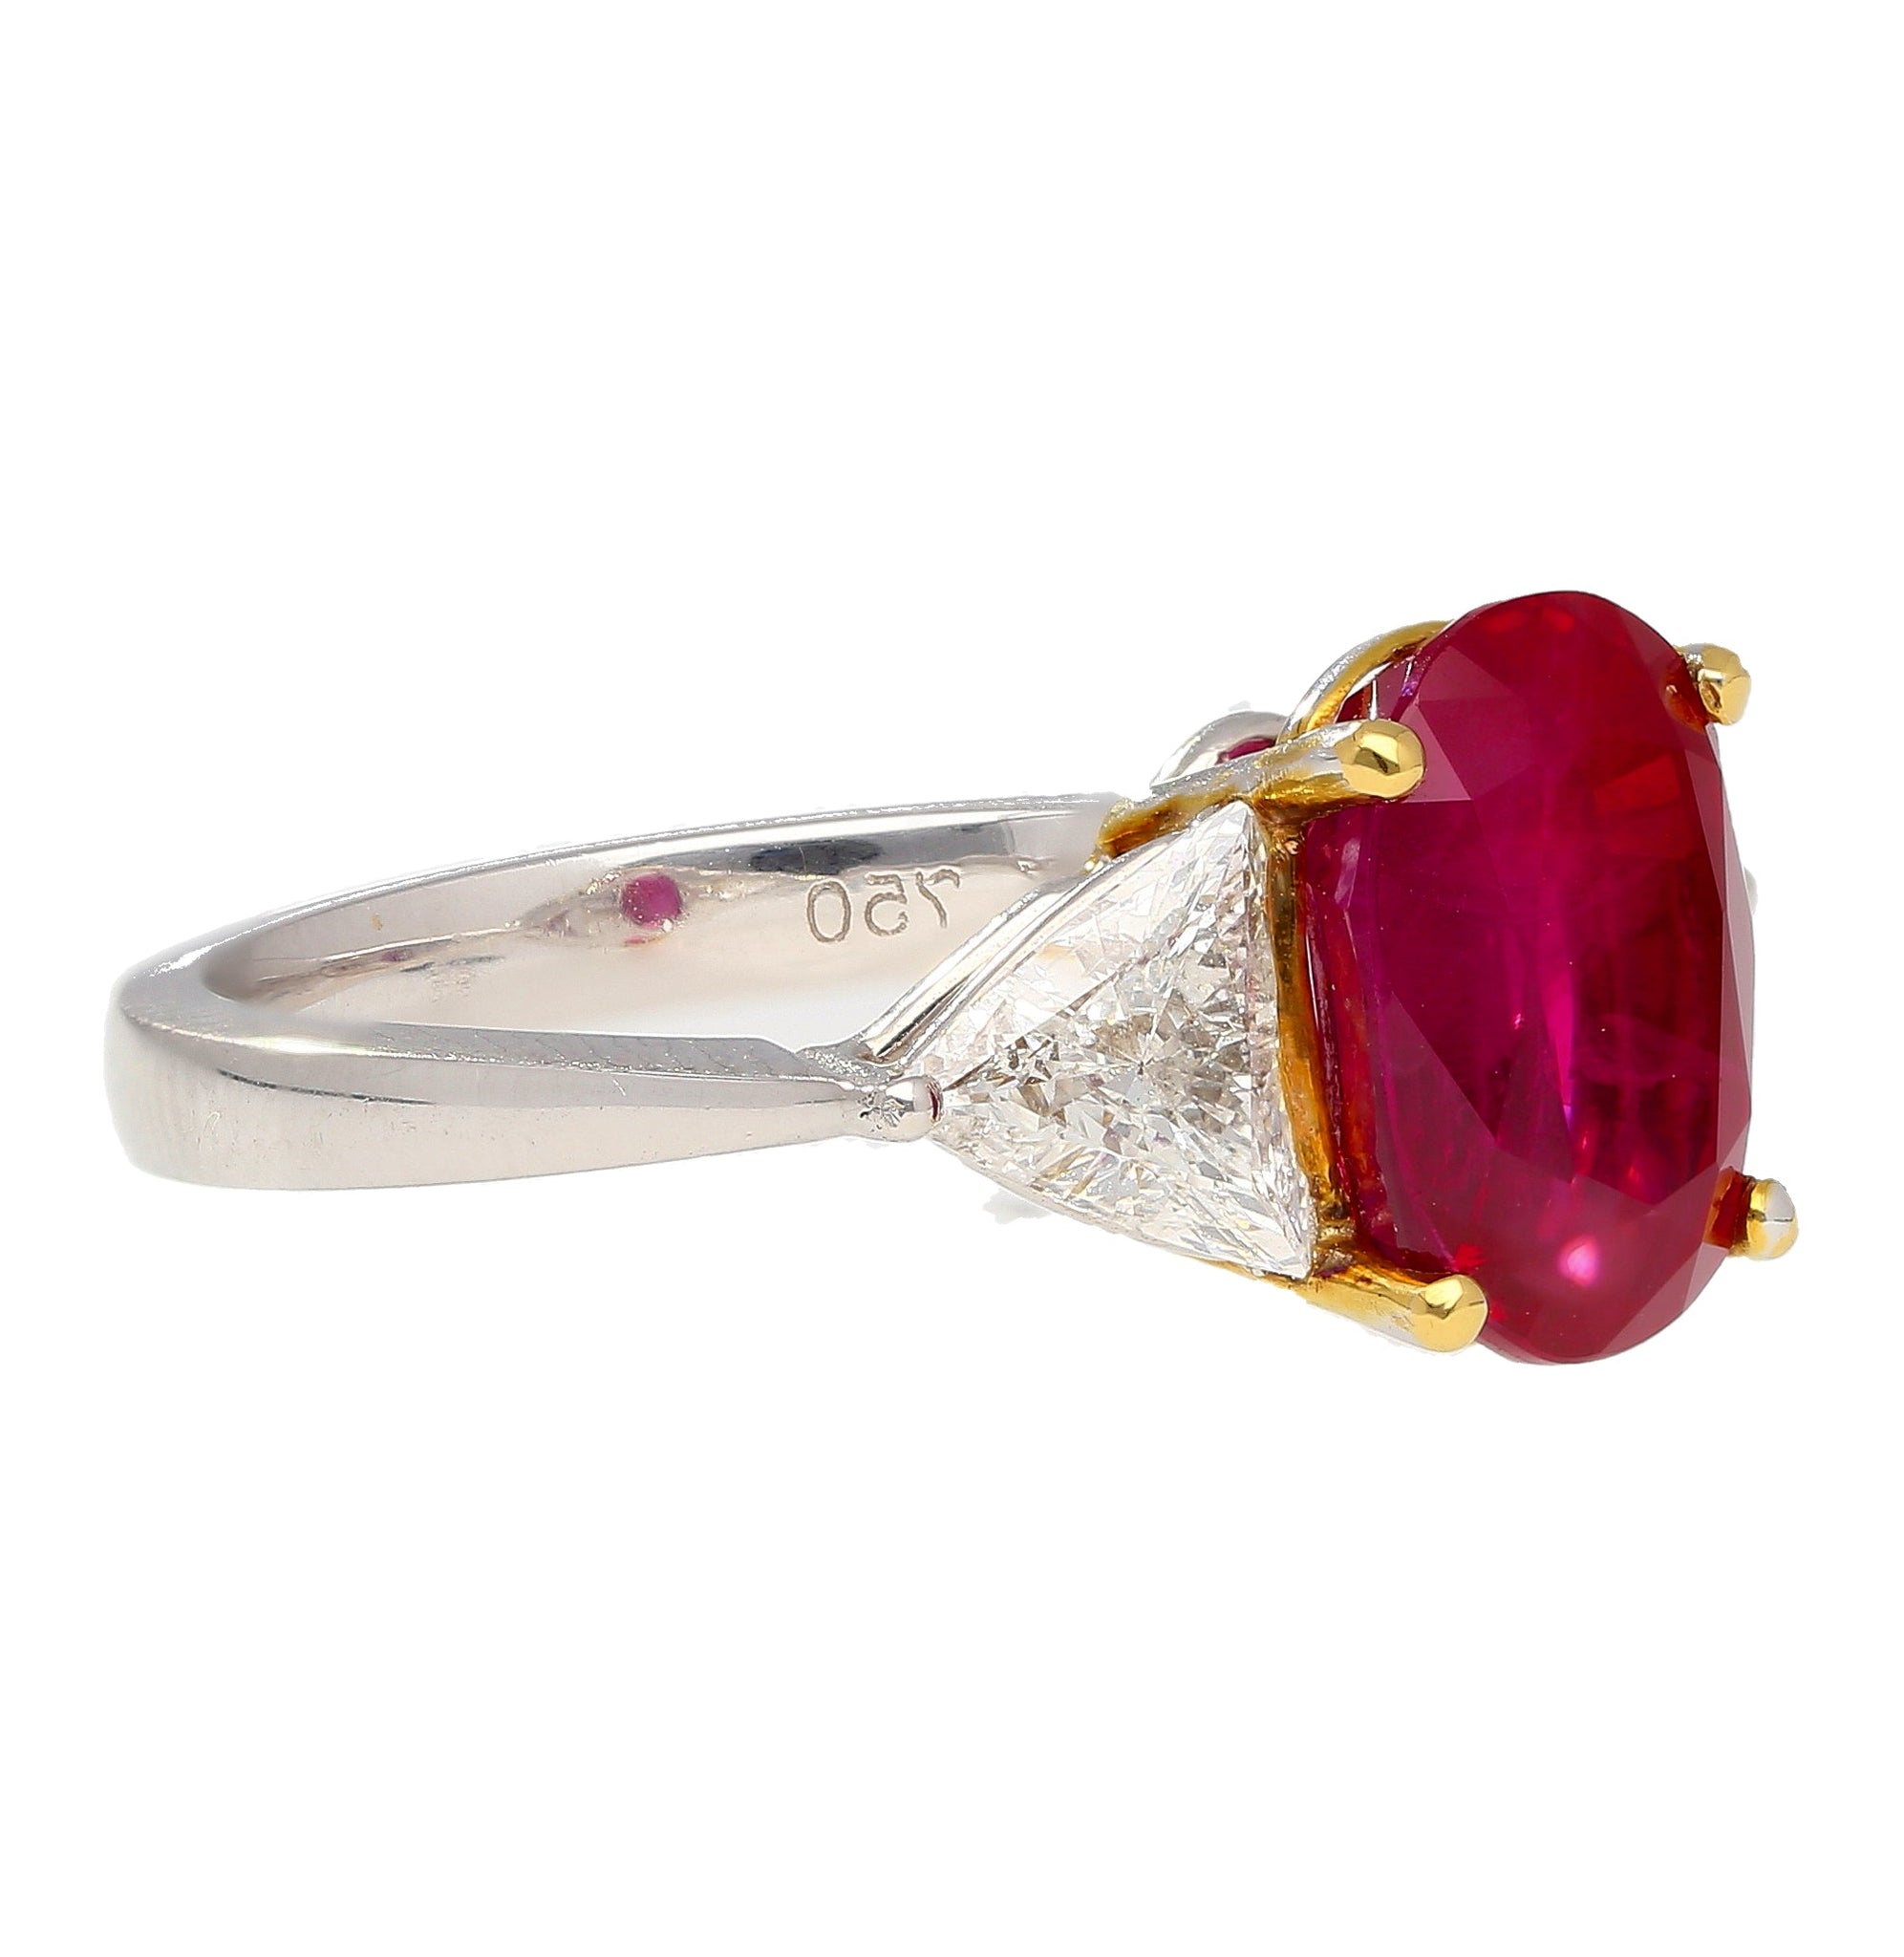 Gubelin Certified 4.47 Oval Cut Ruby with Trillion Cut Diamond Sides in 18K White Gold Ring-Rings-ASSAY